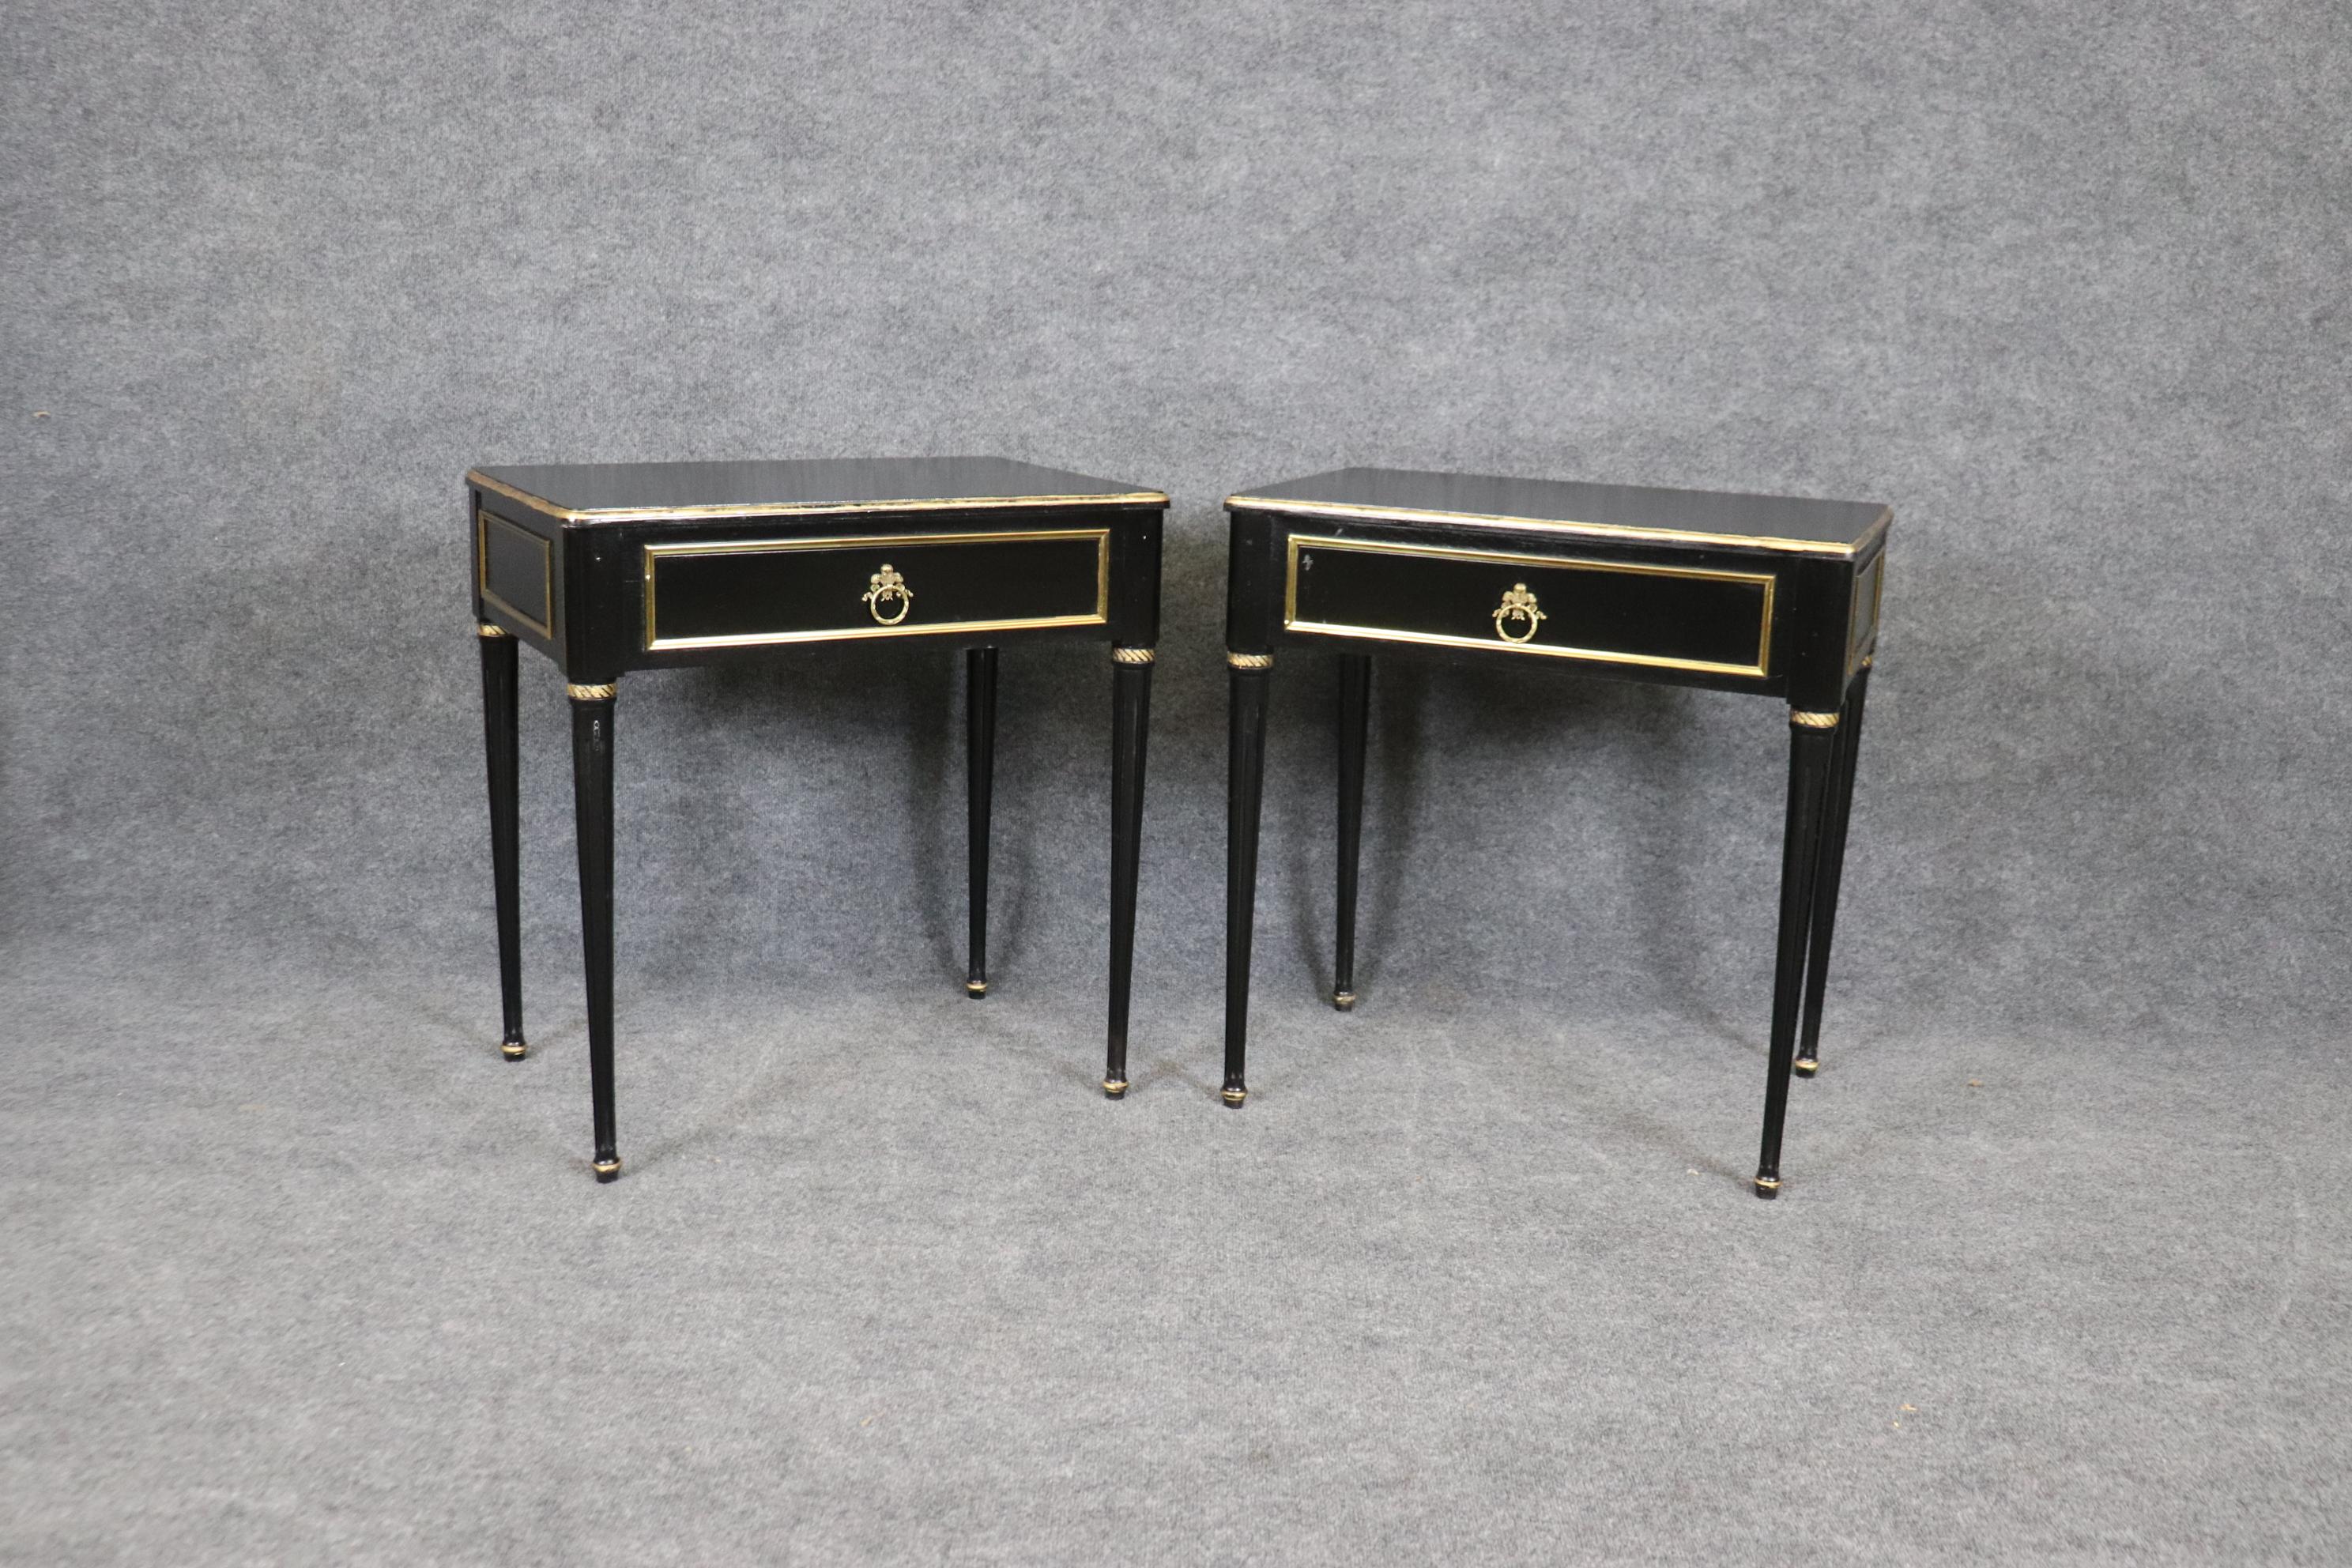 Mid-20th Century Pair of Maison Jansen Style Ebonized Gilded Brass Trimmed End Tables